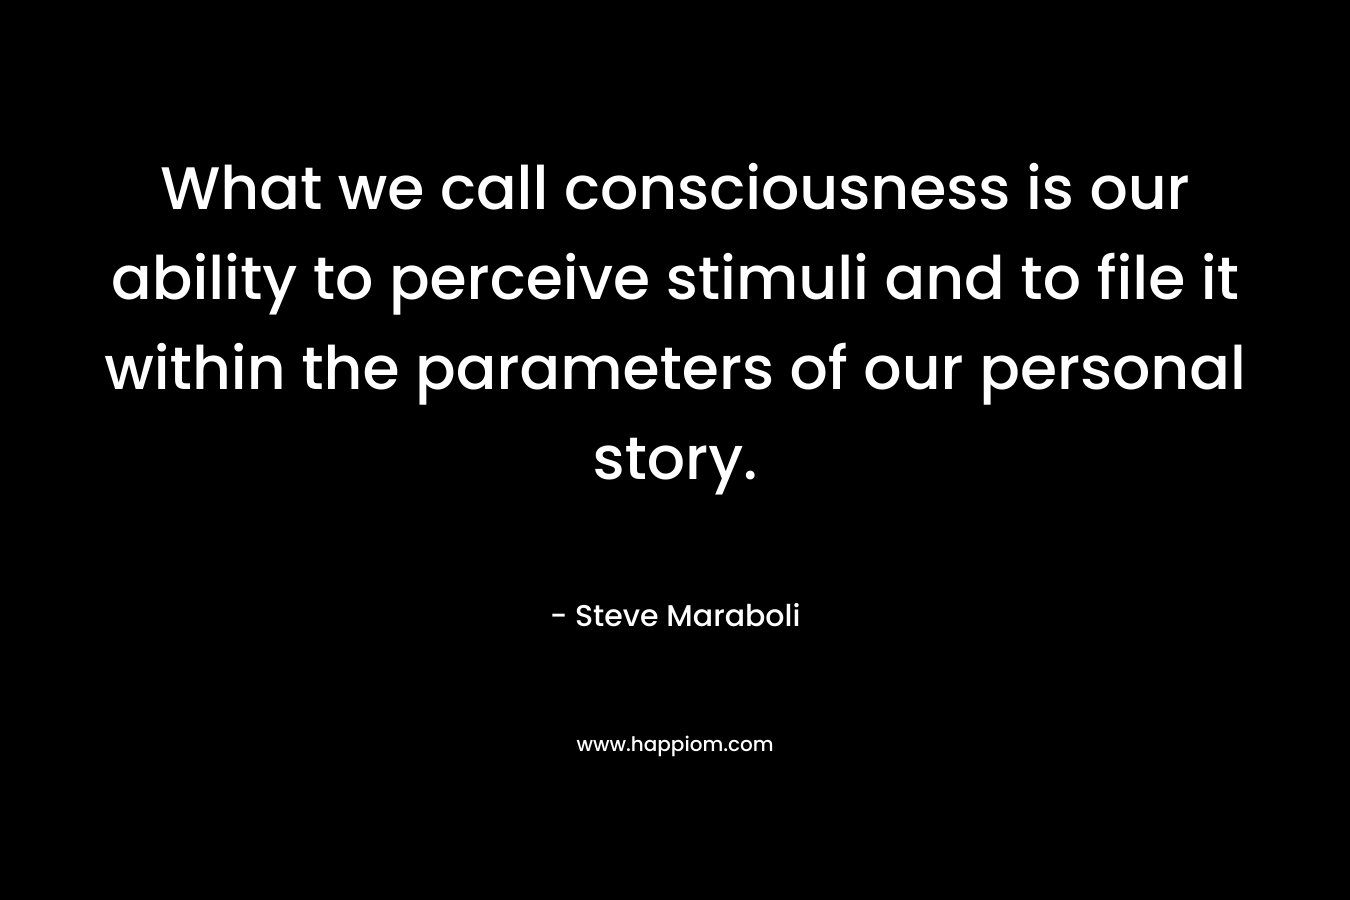 What we call consciousness is our ability to perceive stimuli and to file it within the parameters of our personal story. – Steve Maraboli